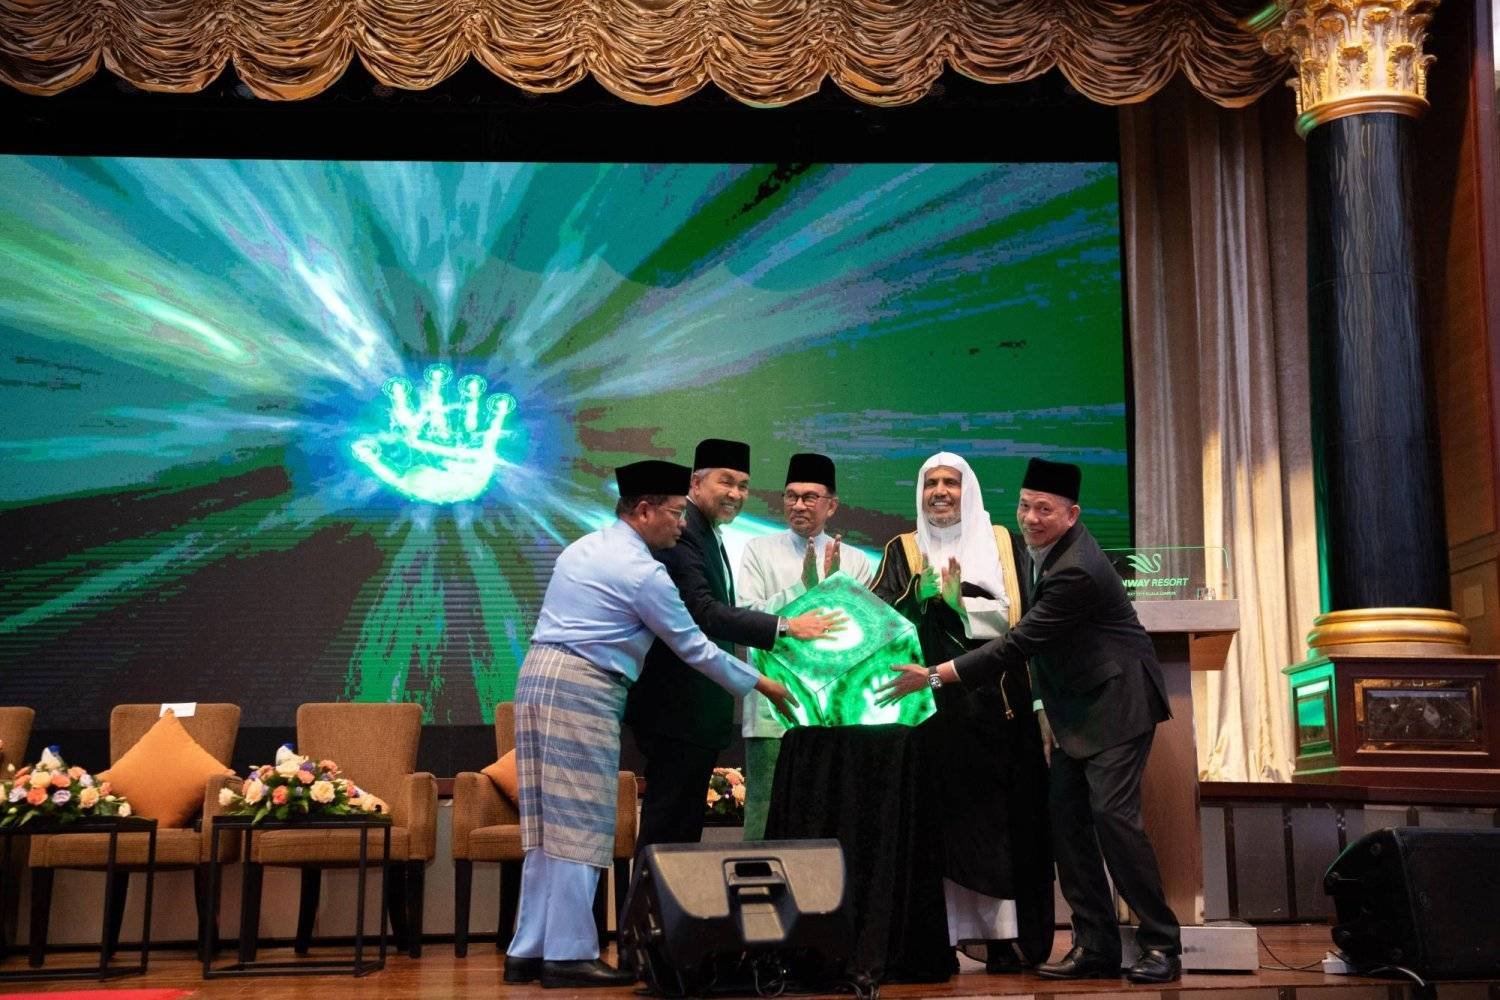 Al-Issa, the Prime Minister of Malaysia and his two deputies during the launch of the Religious Leaders Conference in Kuala Lumpur (Asharq Al-Awsat)